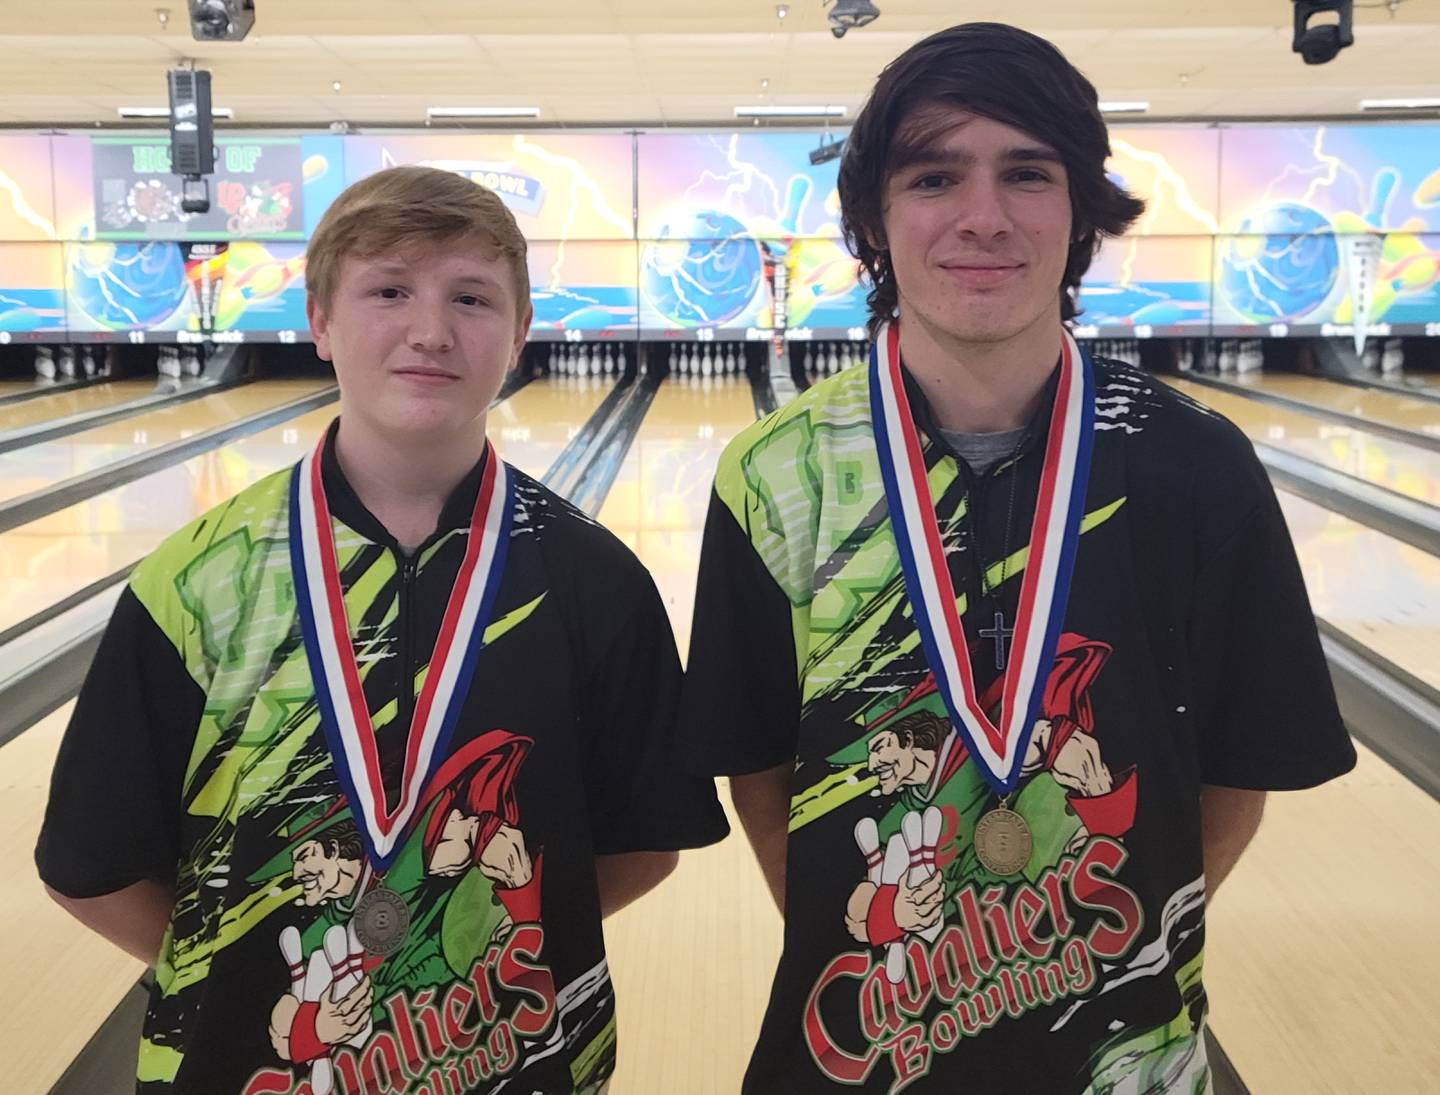 La Salle-Peru junior Ethan Picco (right) earned the individual championship at Tuesday's Interstate Eight Conference Boys Bowling meet at Illinois Valley Super Bowl in Peru, while classmate Chance Hank finished runner-up. The two led the Cavaliers to the team title over second-place Sycamore.